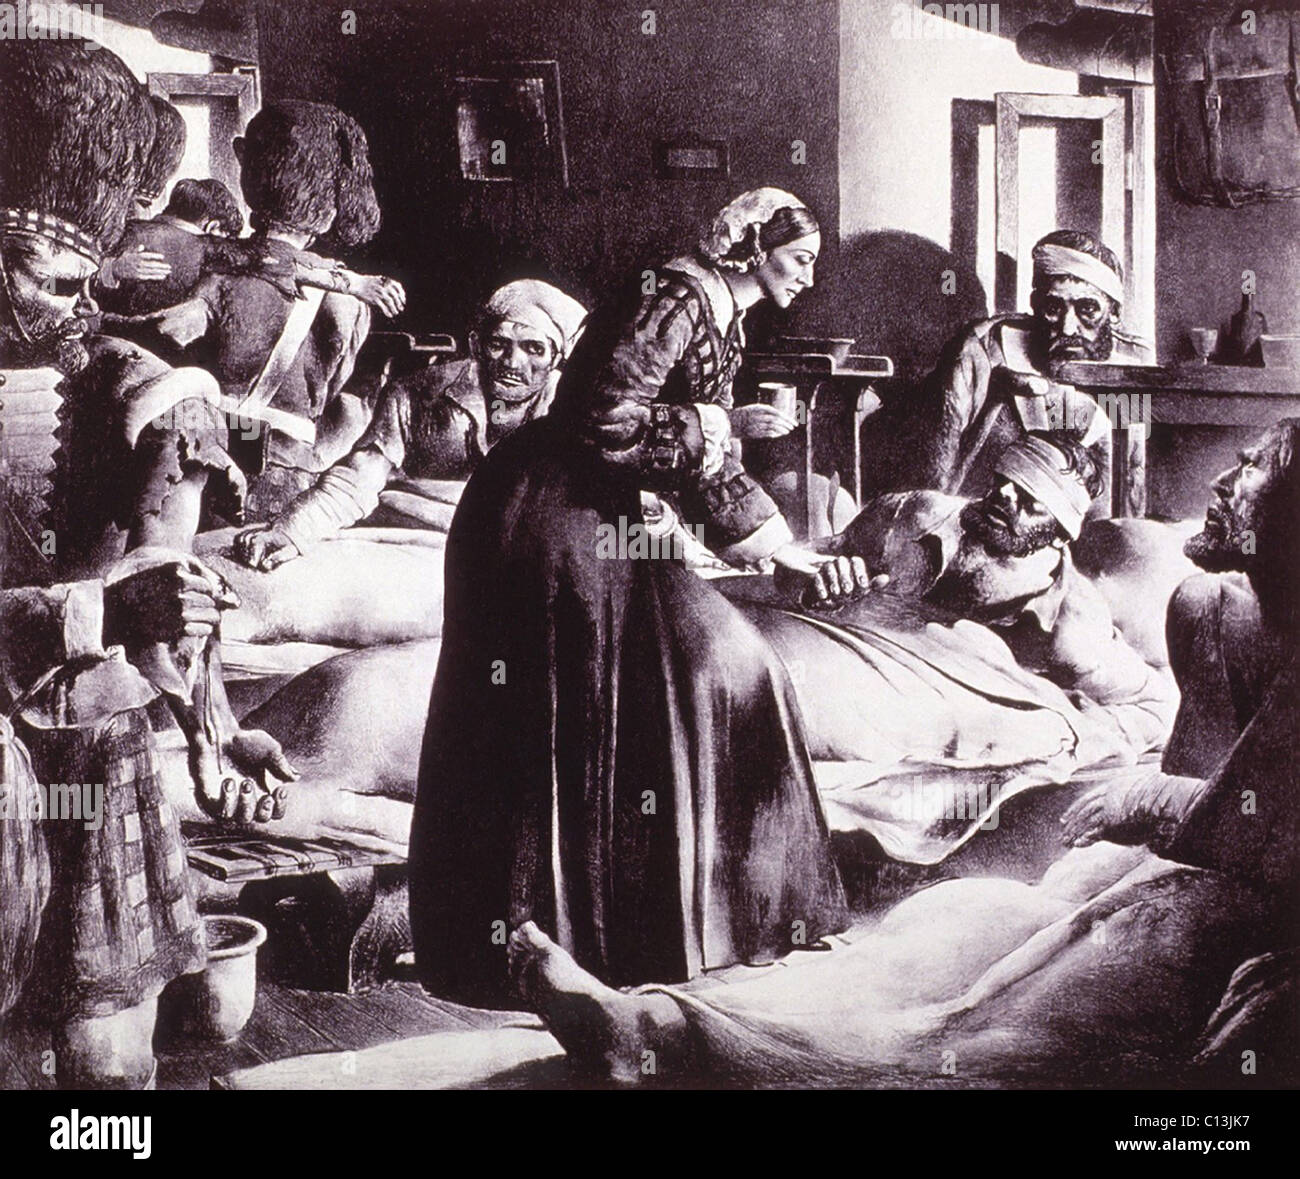 Florence Nightingale (1820-1910), ministering to soldiers at Scutari, a suburb of Istanbul (across the Bosporus from Istanbul) during the Crimean War. She defied her wealthy family by adopting the lower class profession of nursing. With her education and social position, she reformed the profession and British treatment of sick and wounded soldiers. 1854. Lithograph by Robert Riggs, ca. 1930 with modern watercolor. Stock Photo